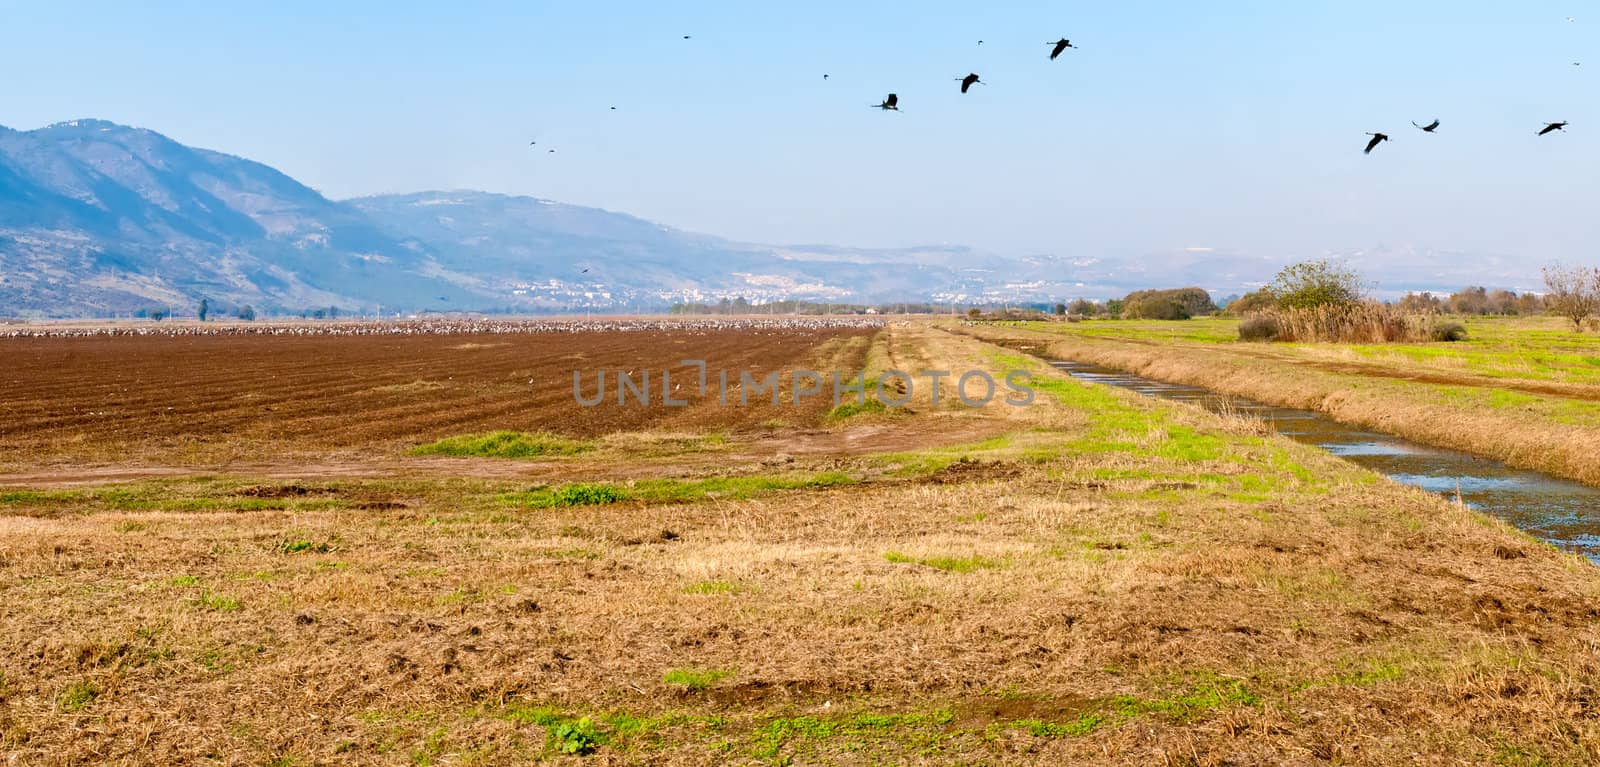 Valley "Agmon-Khula and" adjacent to the ridges and the Golan mountains of Naftali. Winter. Israel.